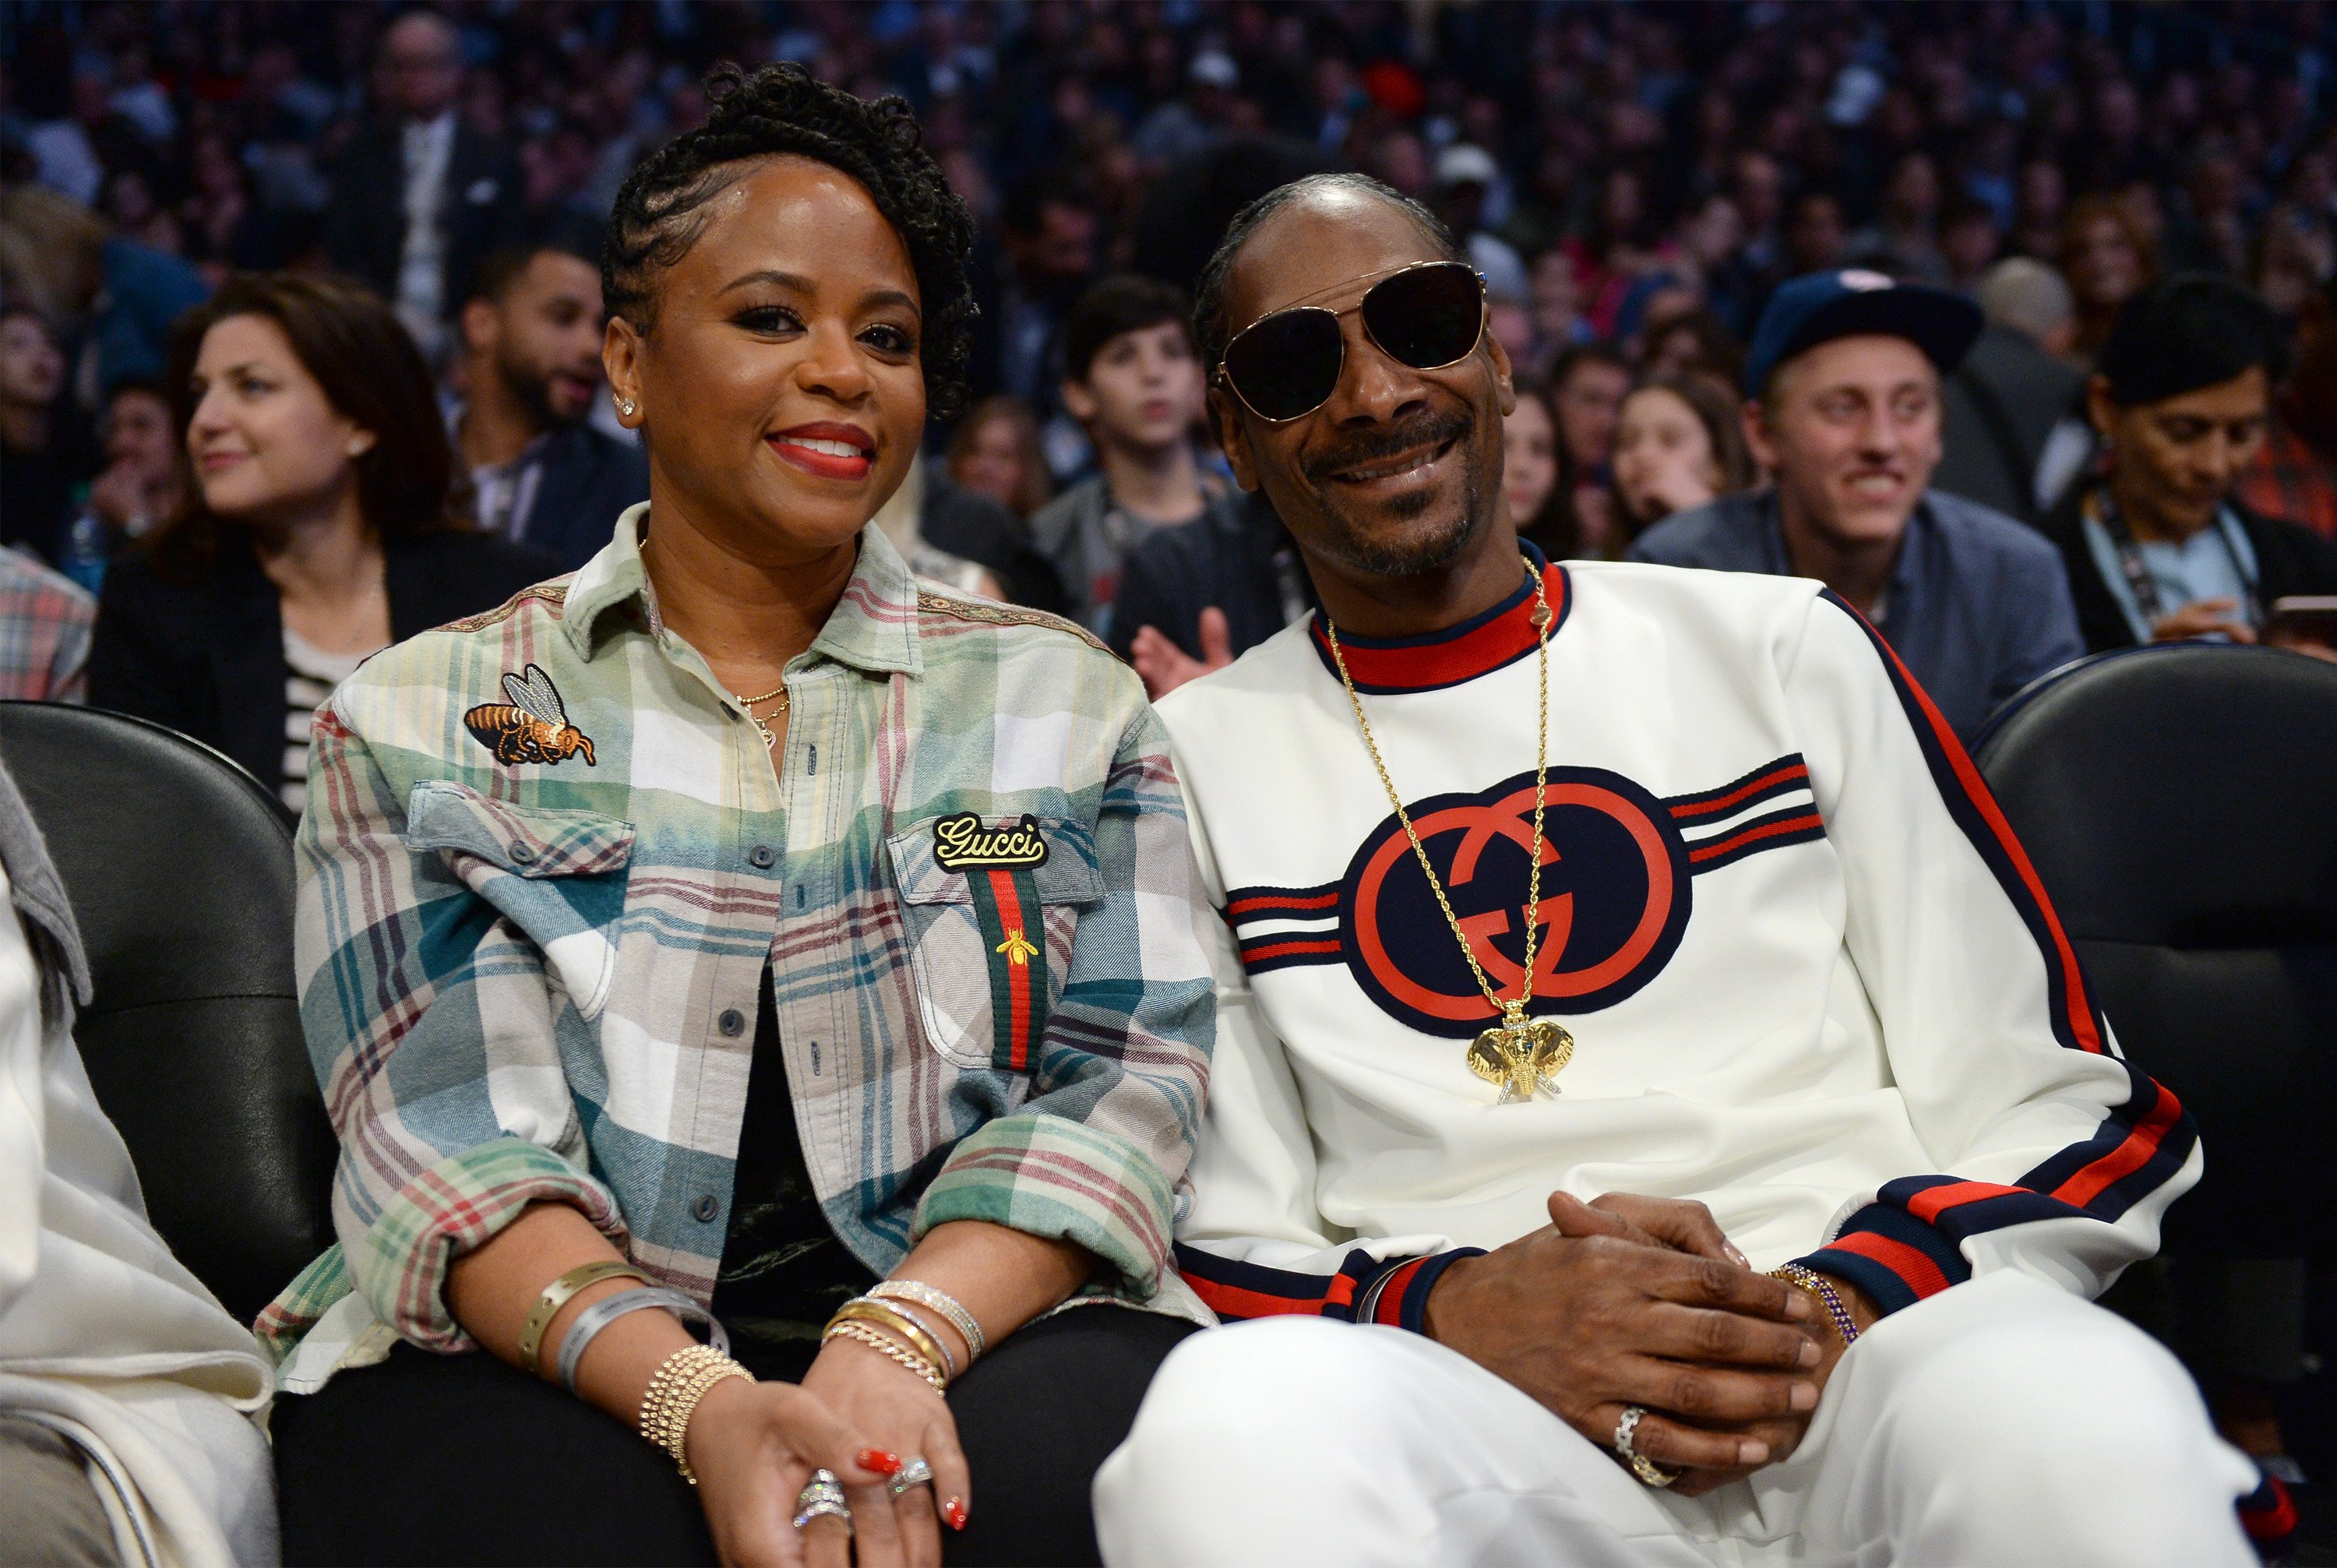 Snoop Dogg and his wife Shante Broadus attend the NBA All-Star Game 2018 at Staples Center on February 18, 2018 in Los Angeles, California | Photo: Getty Images